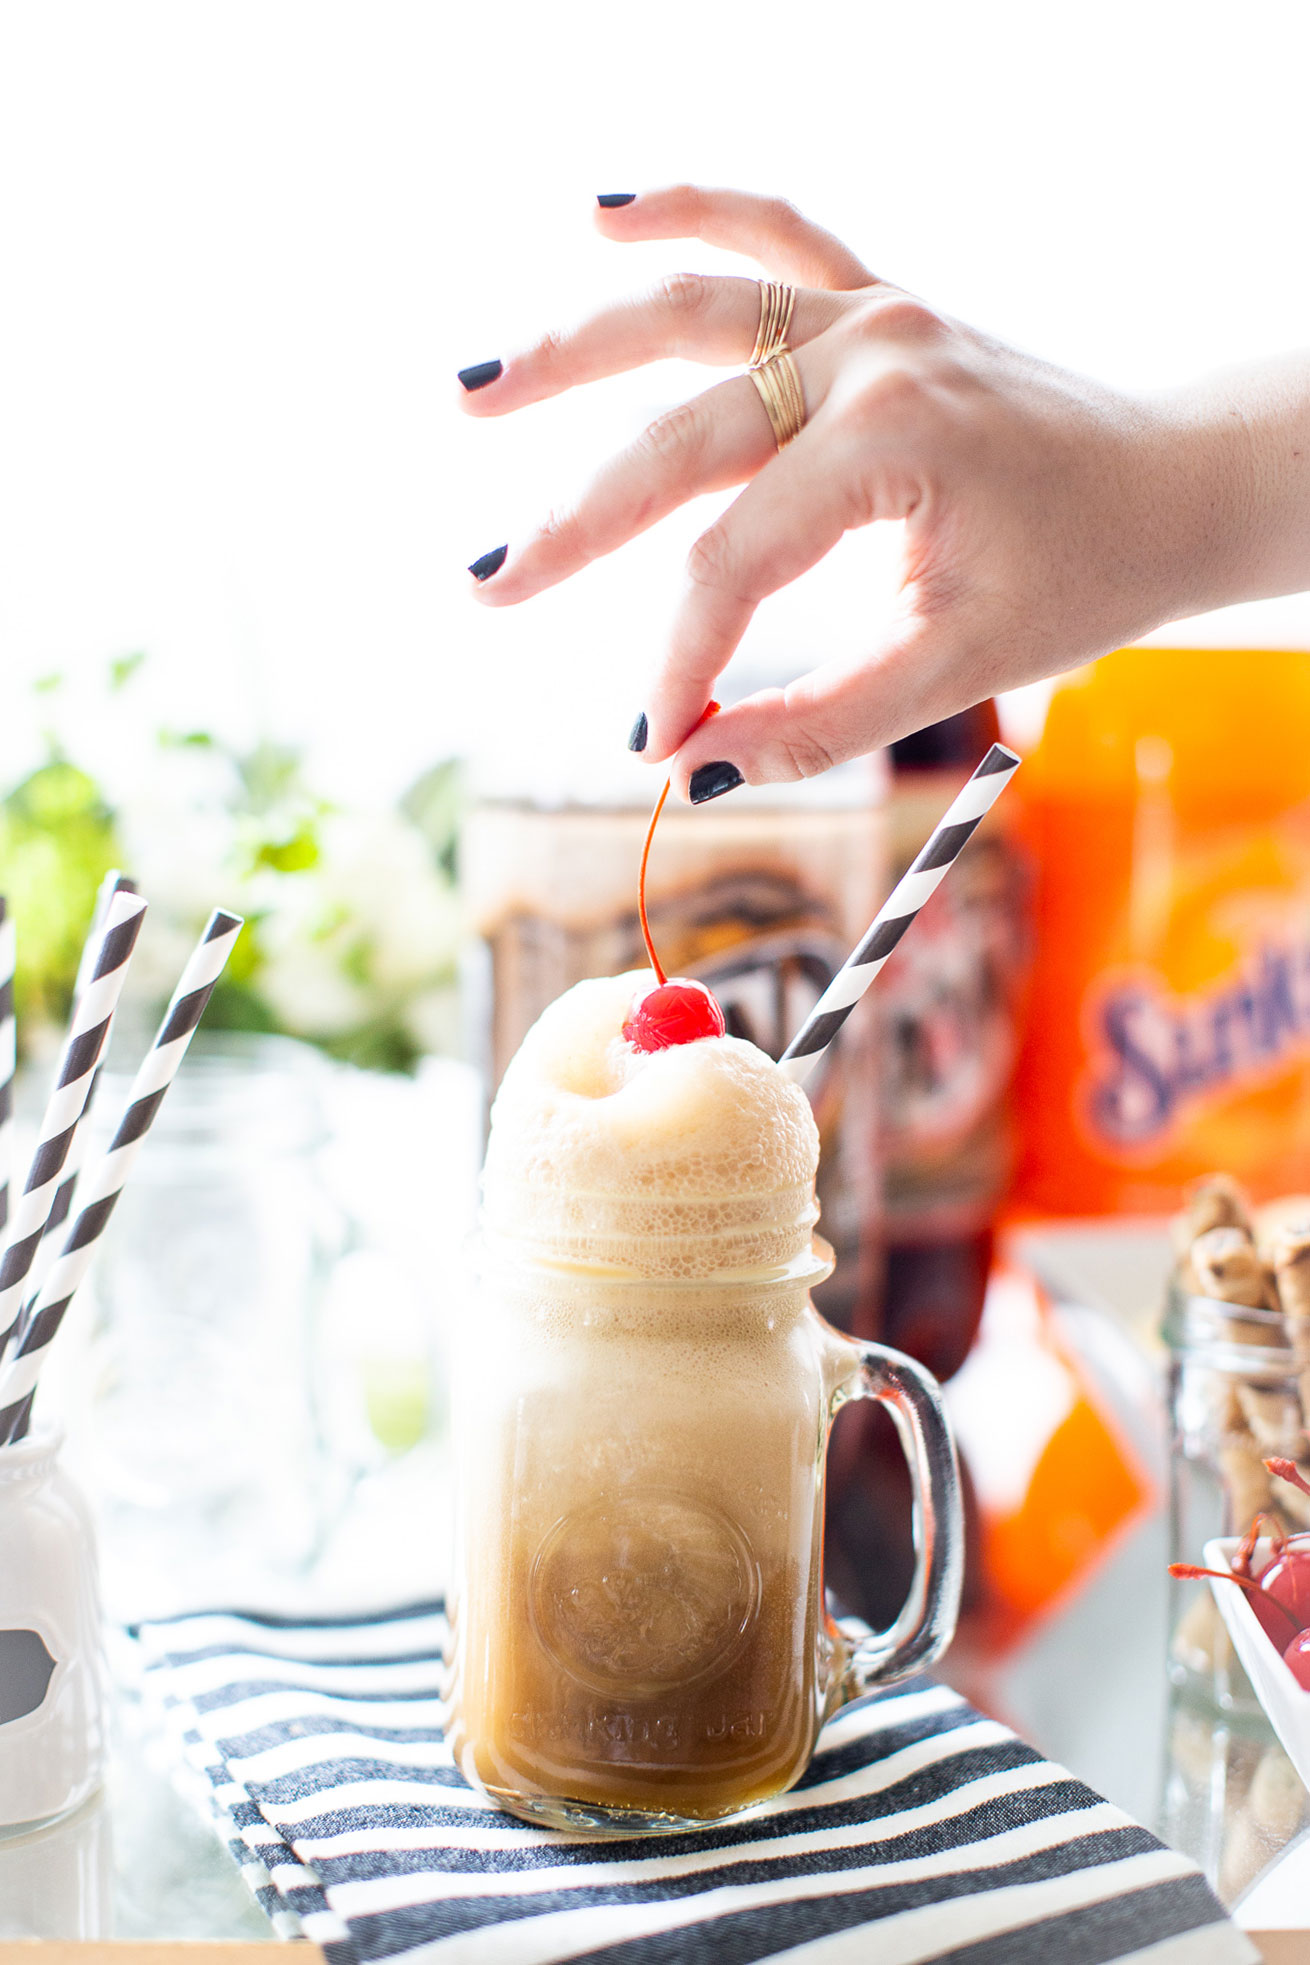 Ready to celebrate family night in a whole new way? Make your own root beer float bar with all of the best toppings, for a legendary sweet treat! | glitterinc.com | @glitterinc